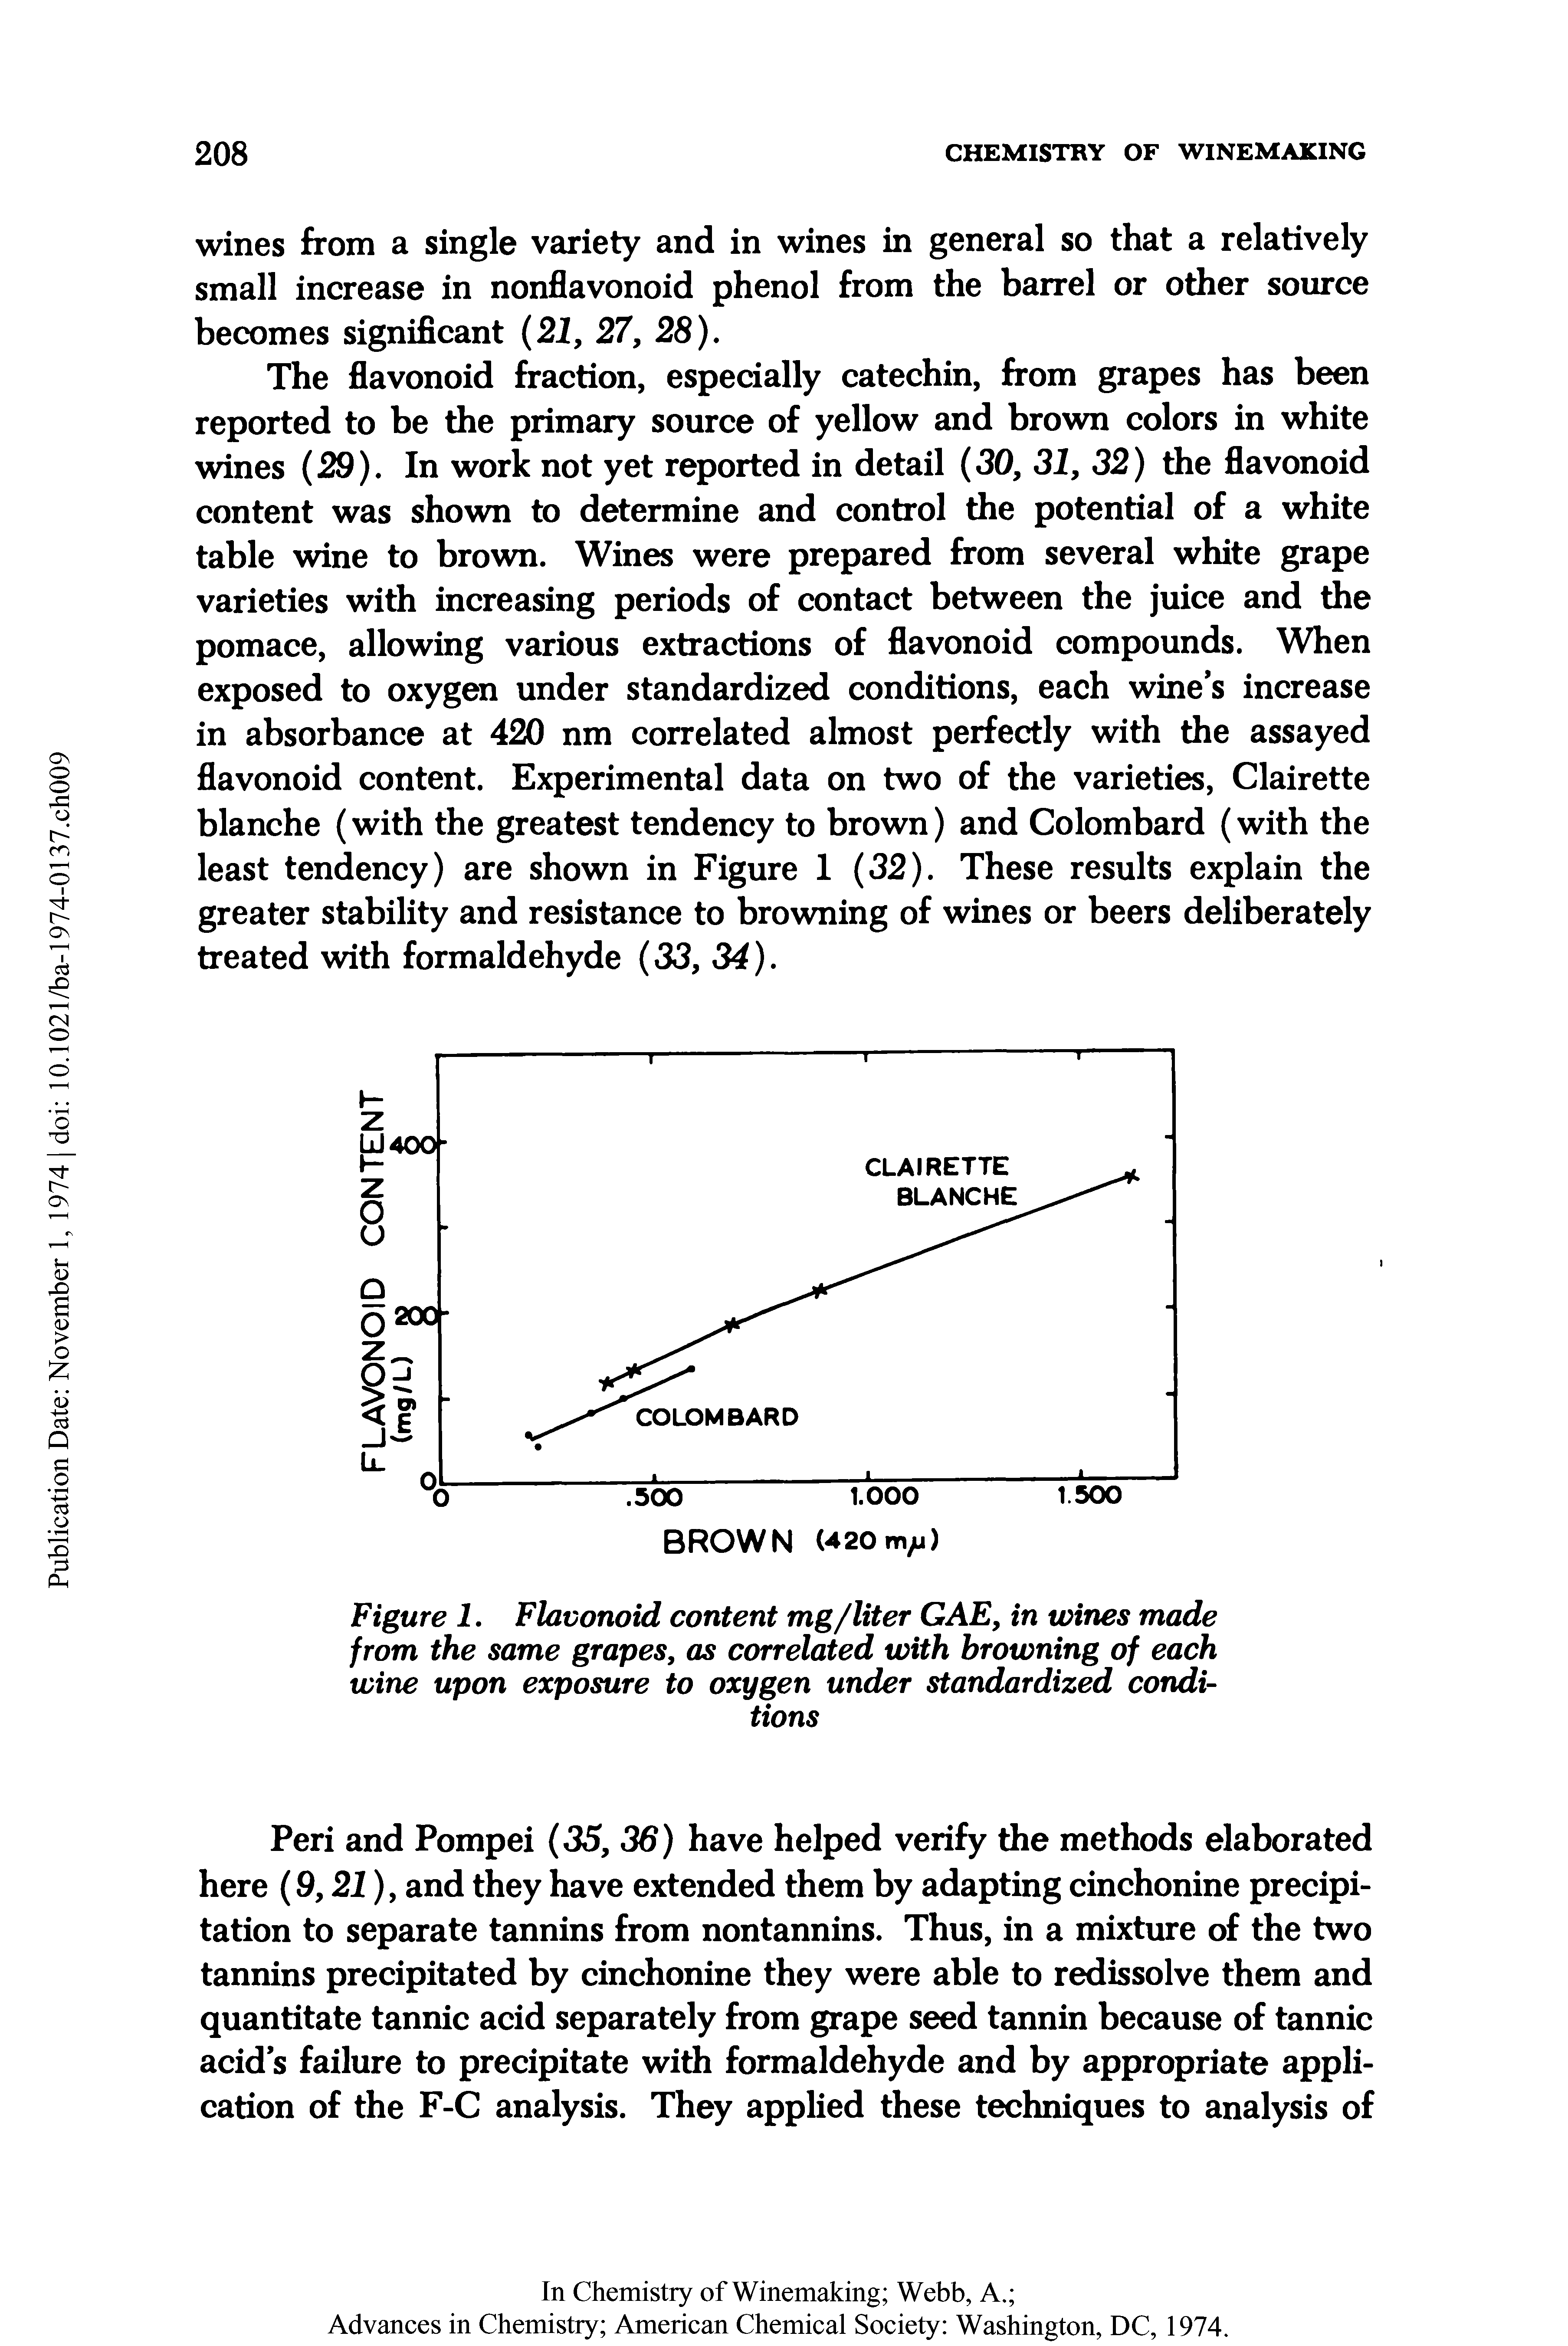 Figure 1. Flavonoid content mg/liter GAE, in wines made from the same grapes, as correlated with browning of each wine upon exposure to oxygen under standardized conditions...